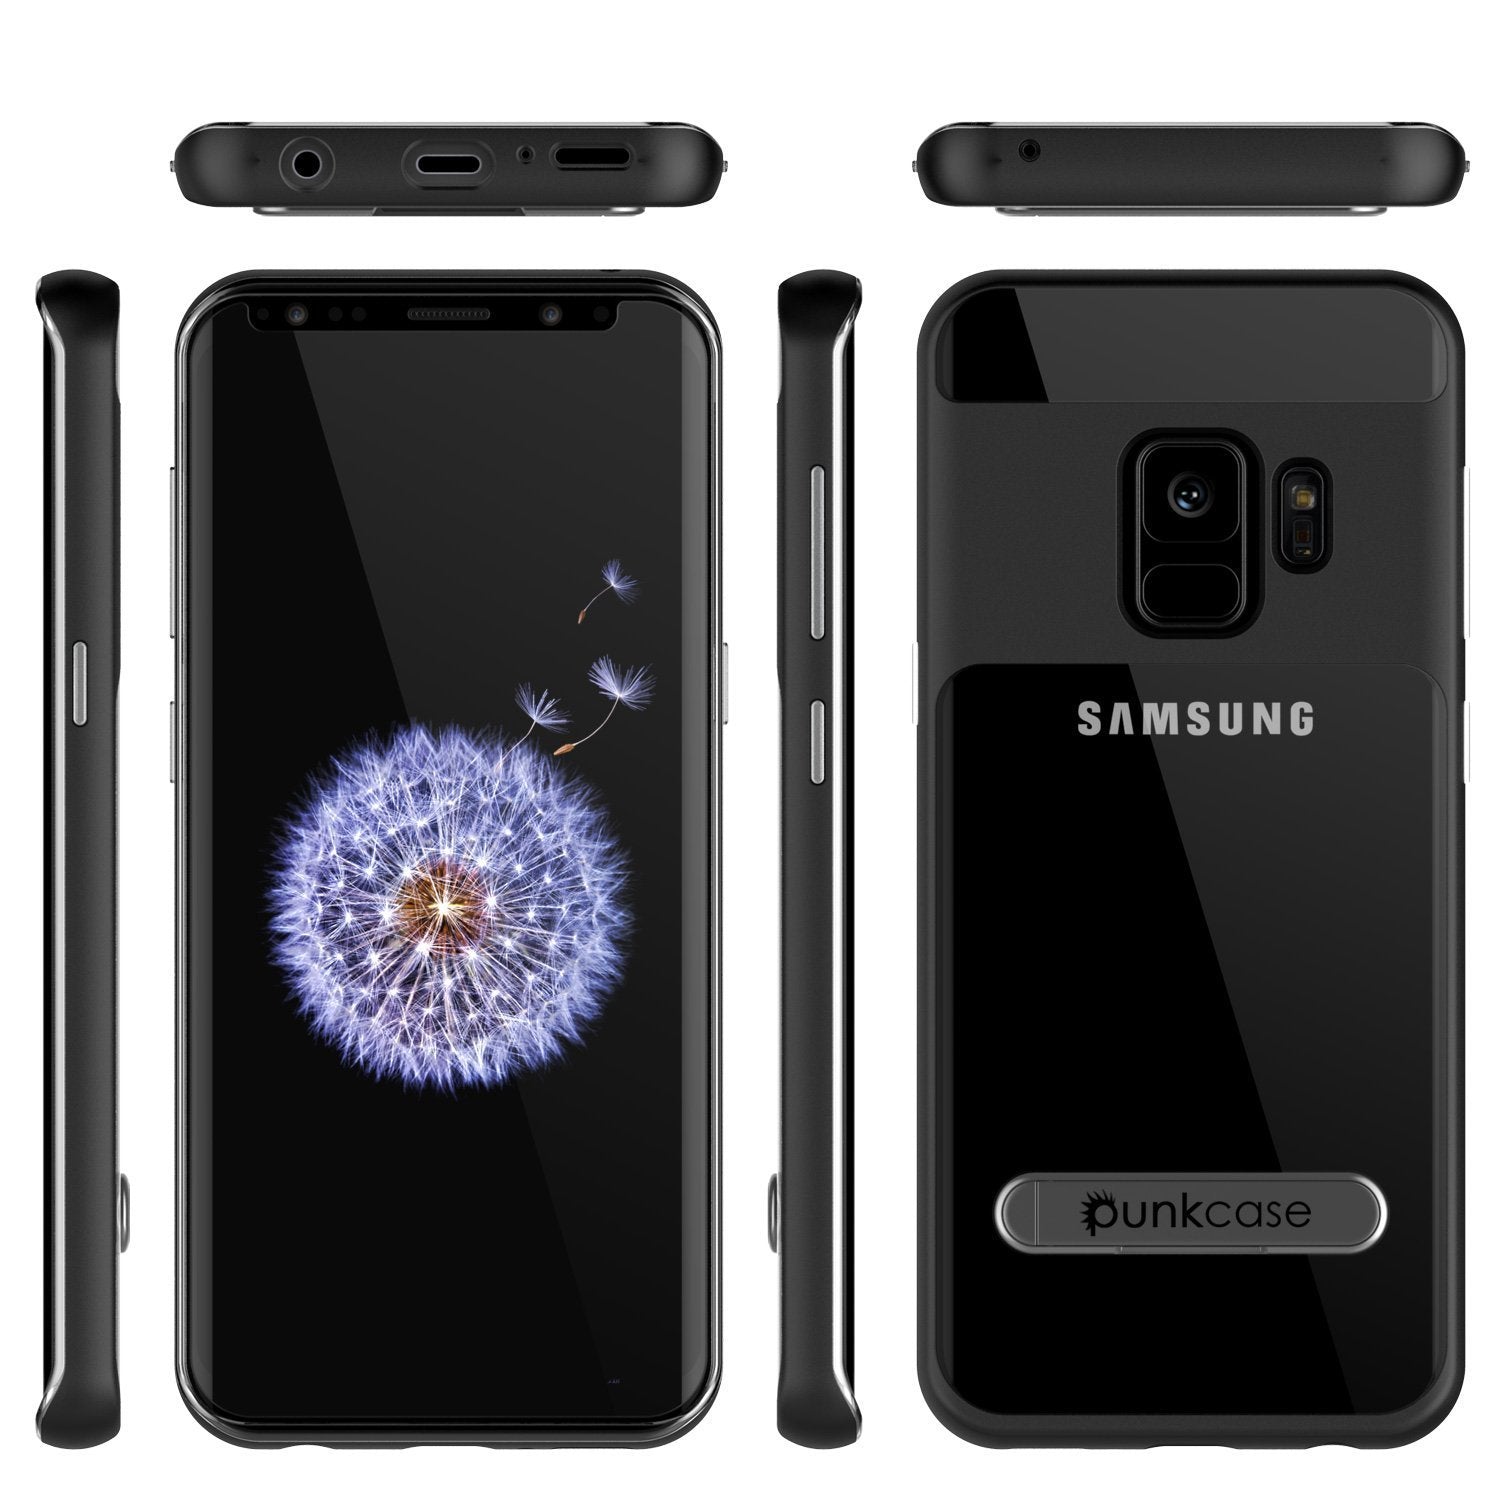 Galaxy S9 Case, PUNKcase [LUCID 3.0 Series] [Slim Fit] [Clear Back] Armor Cover w/ Integrated Kickstand, Anti-Shock System & PUNKSHIELD Screen Protector for Samsung Galaxy S9 [Black]